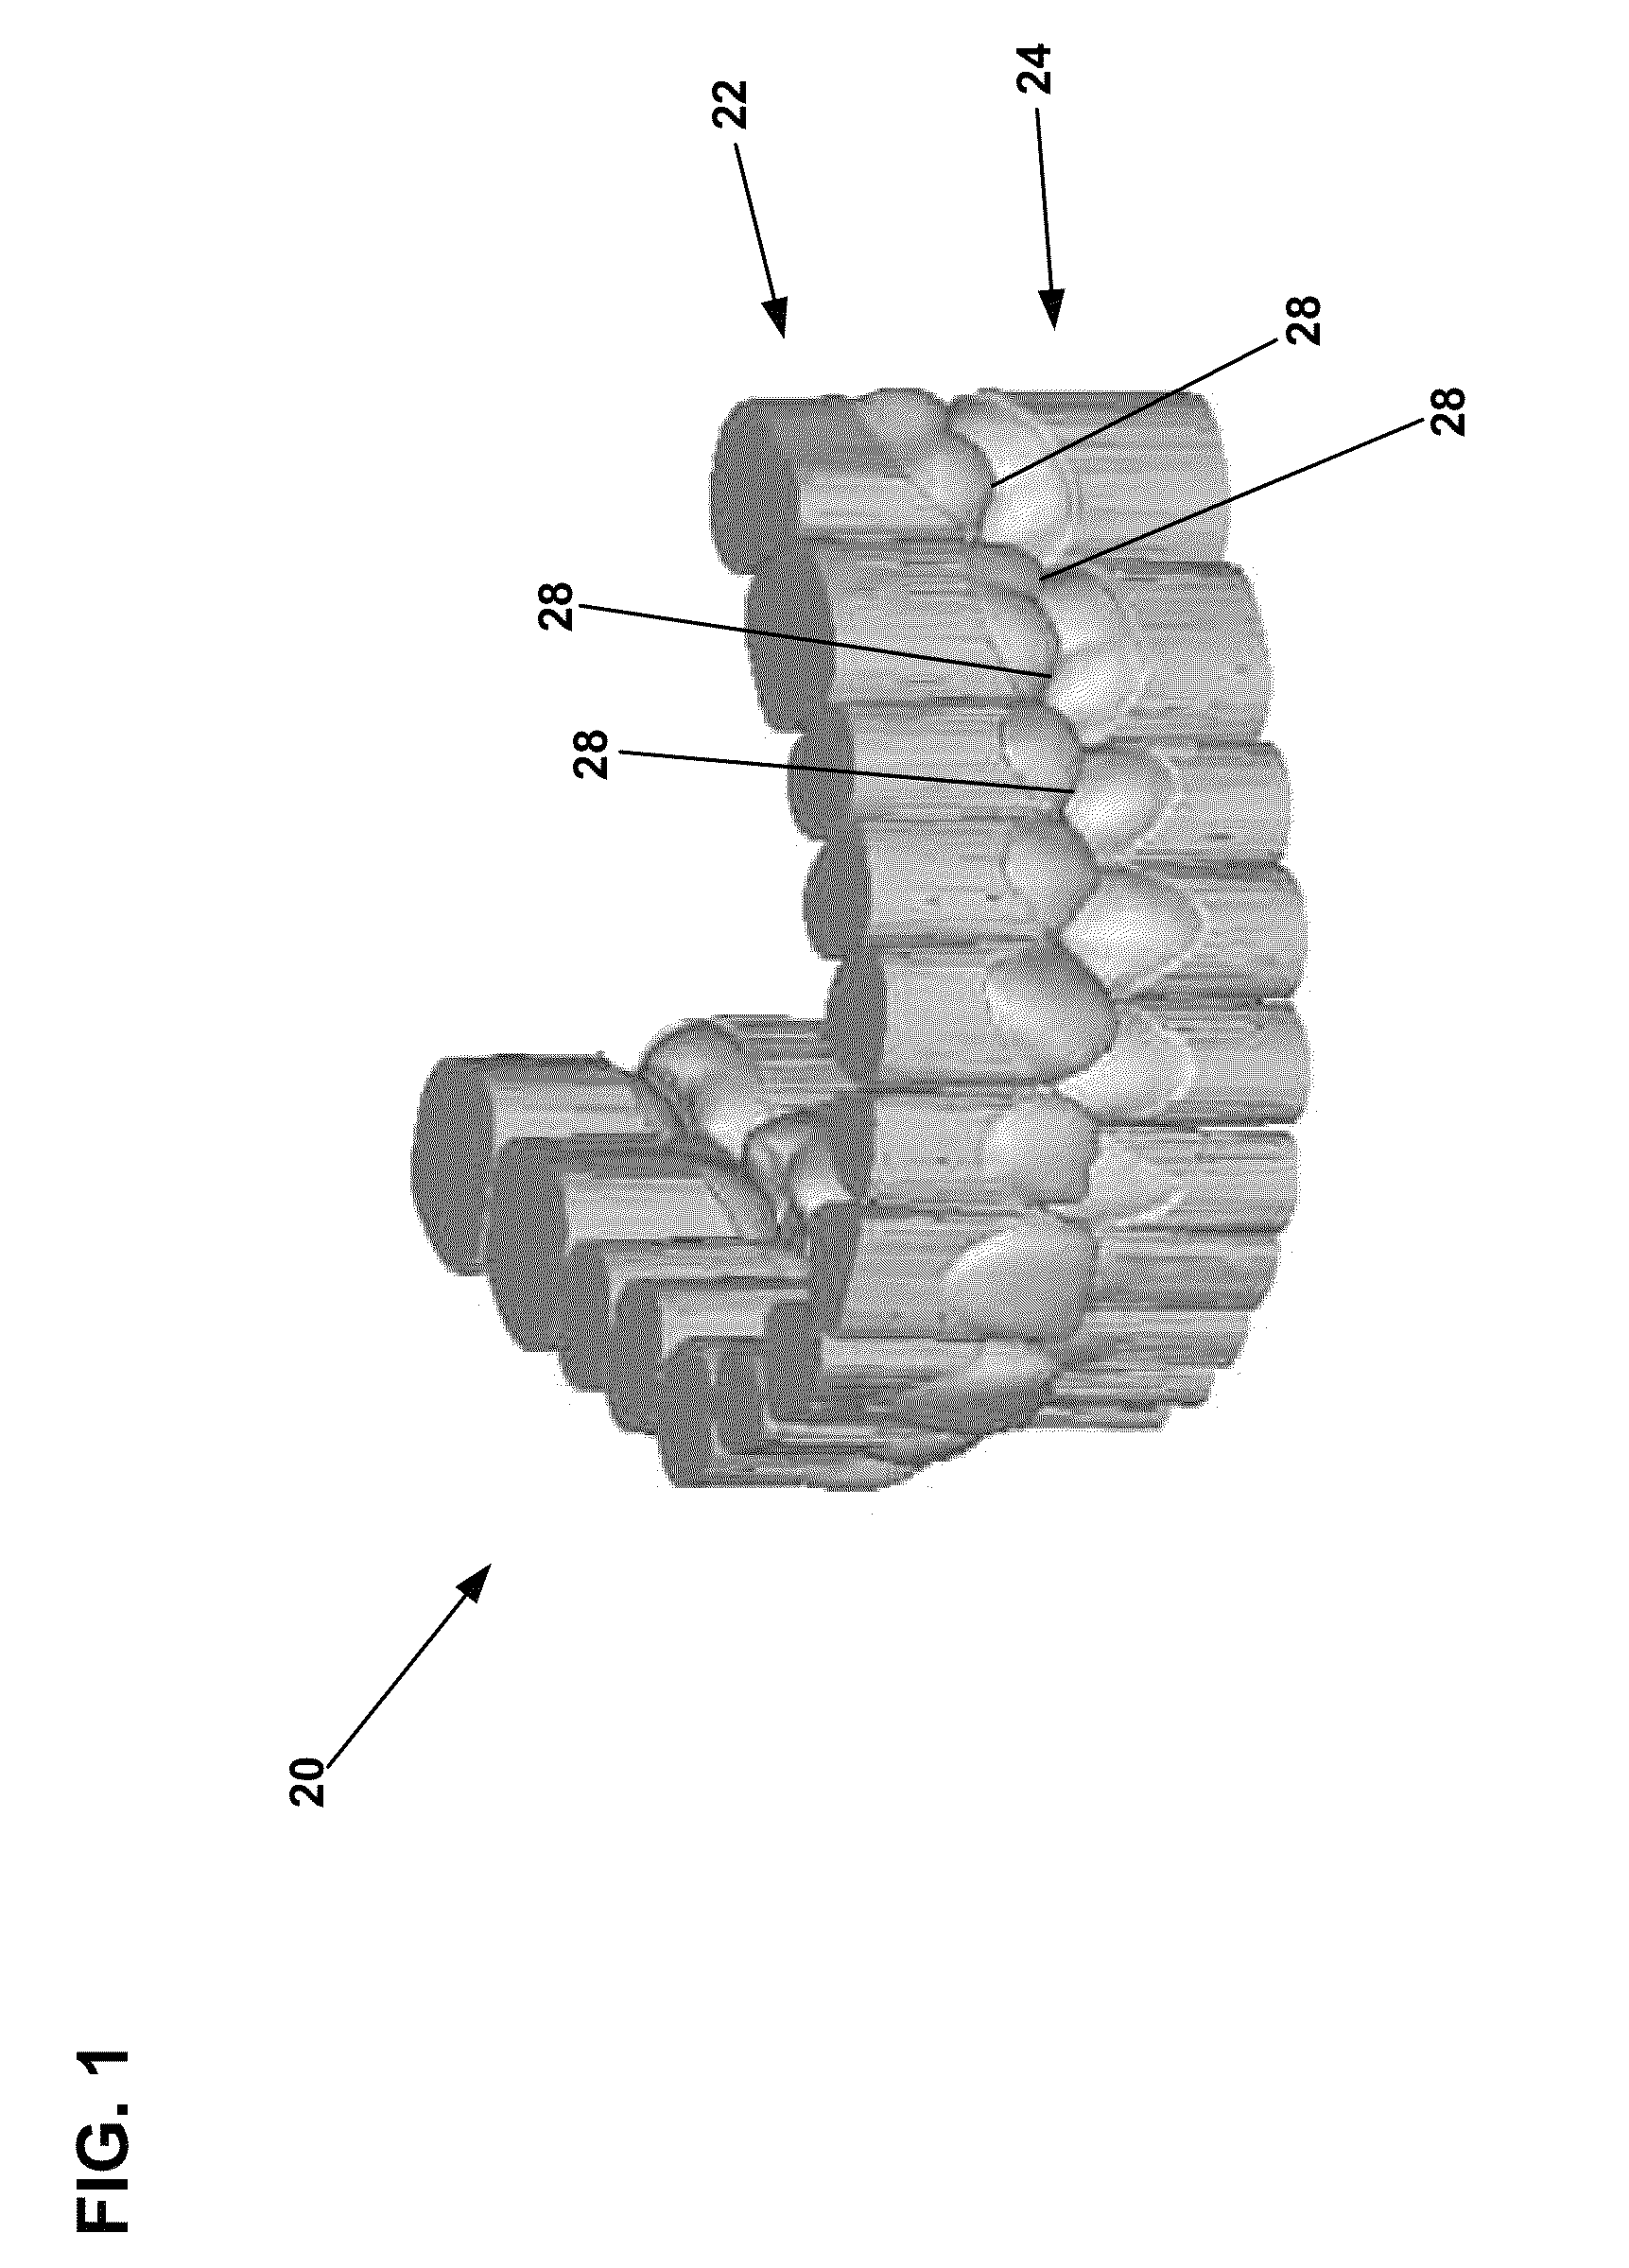 System and method for evaluating orthodontic treatment